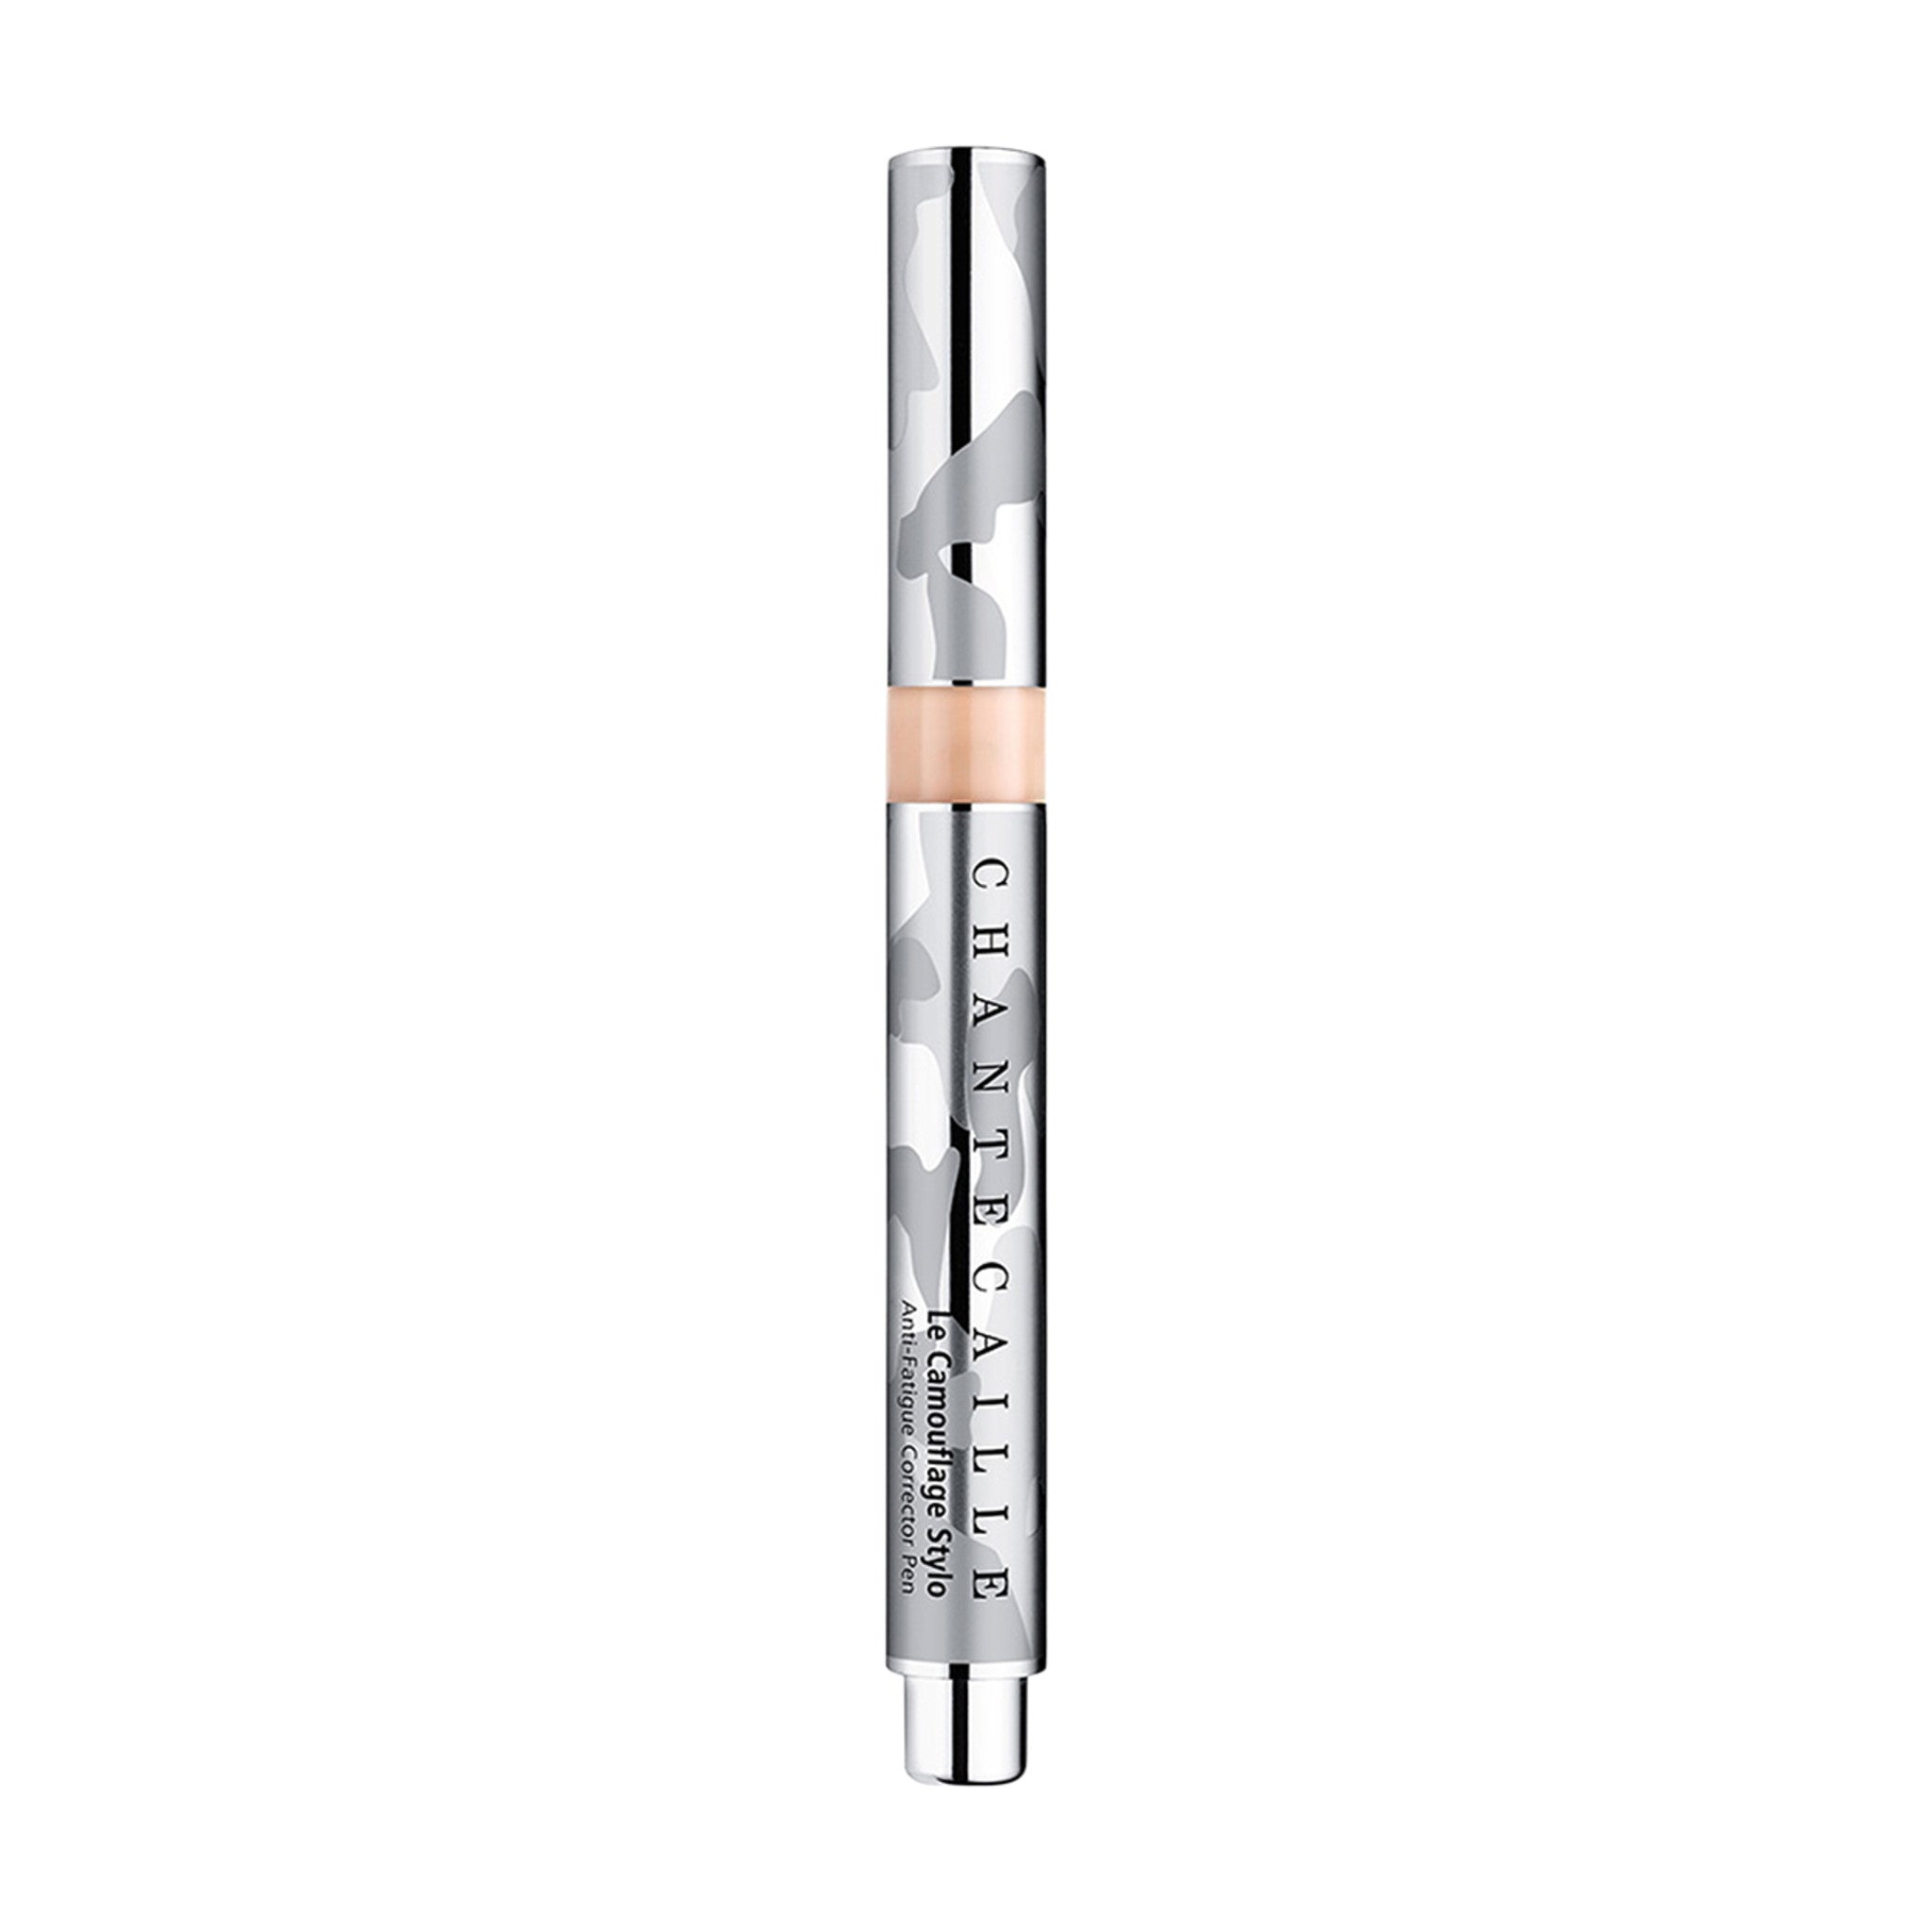 Chantecaille Le Camouflage Stylo Concealer Color/Shade variant: Stylo 3 main image. This product is for light cool pink complexions